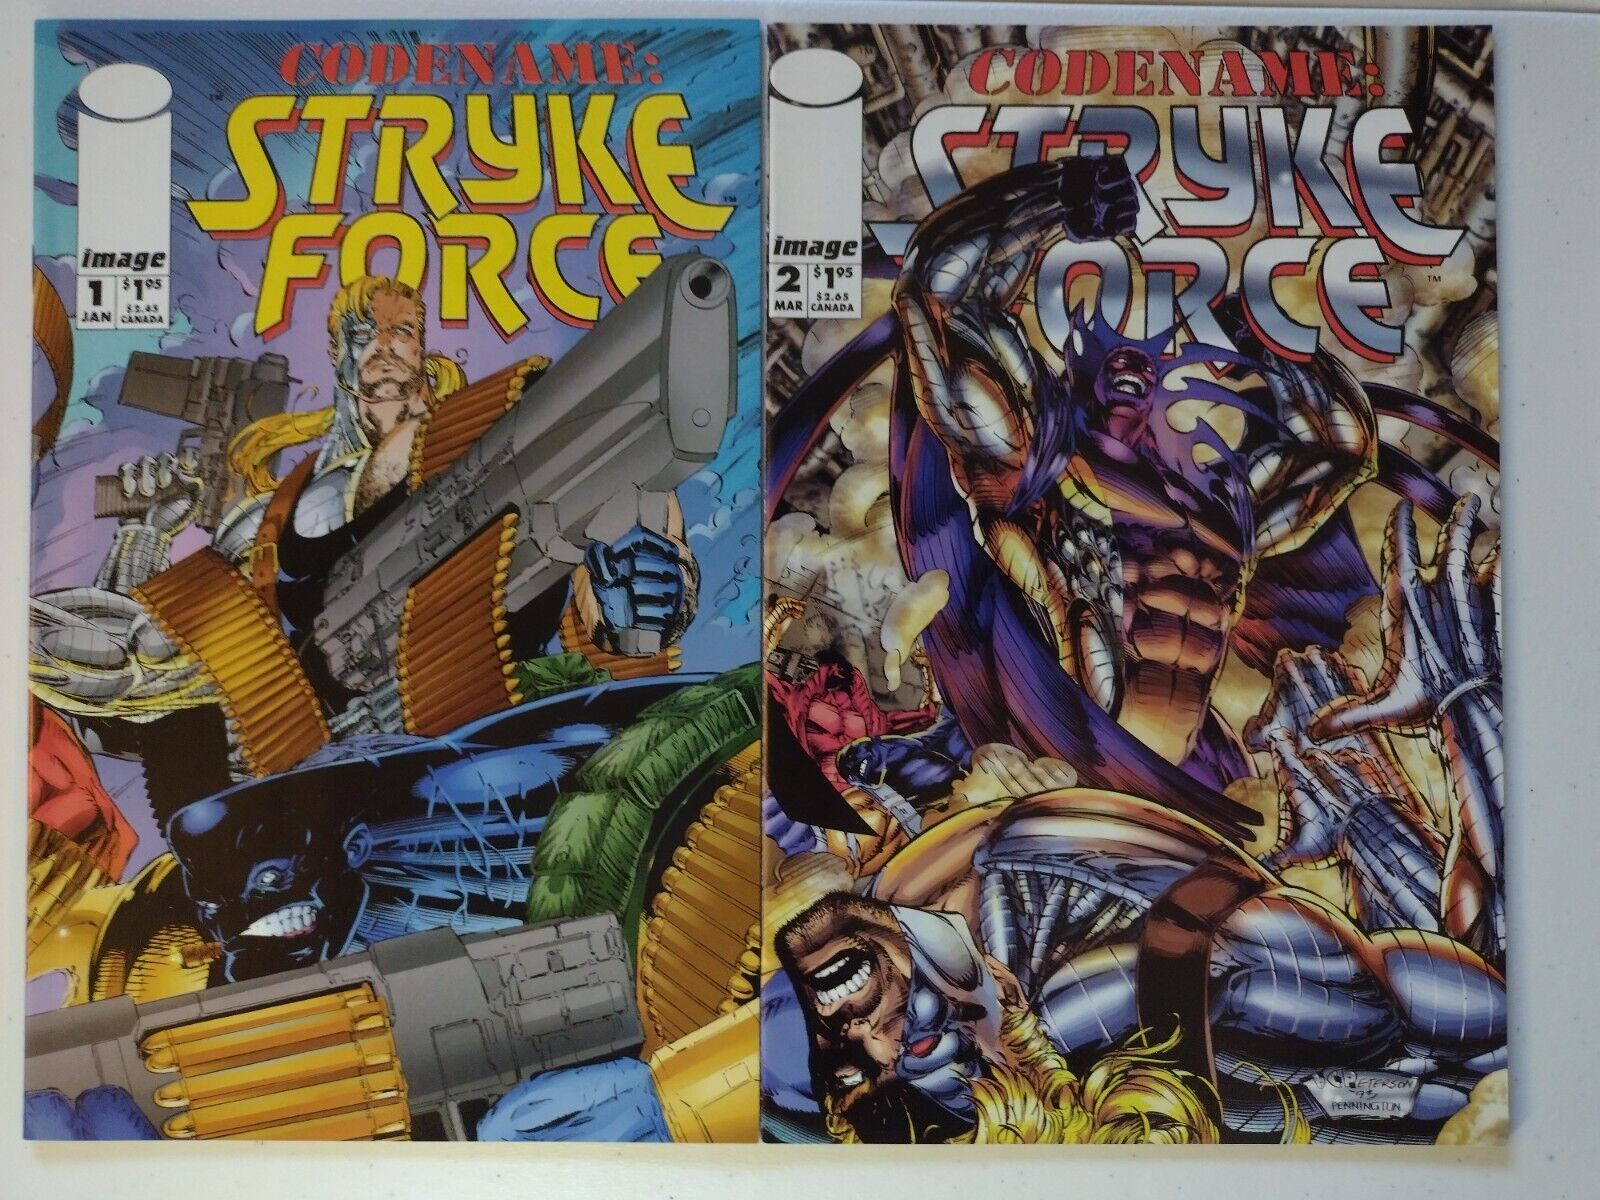 (Image 1994) Codename Strykeforce #1, #2 Lot